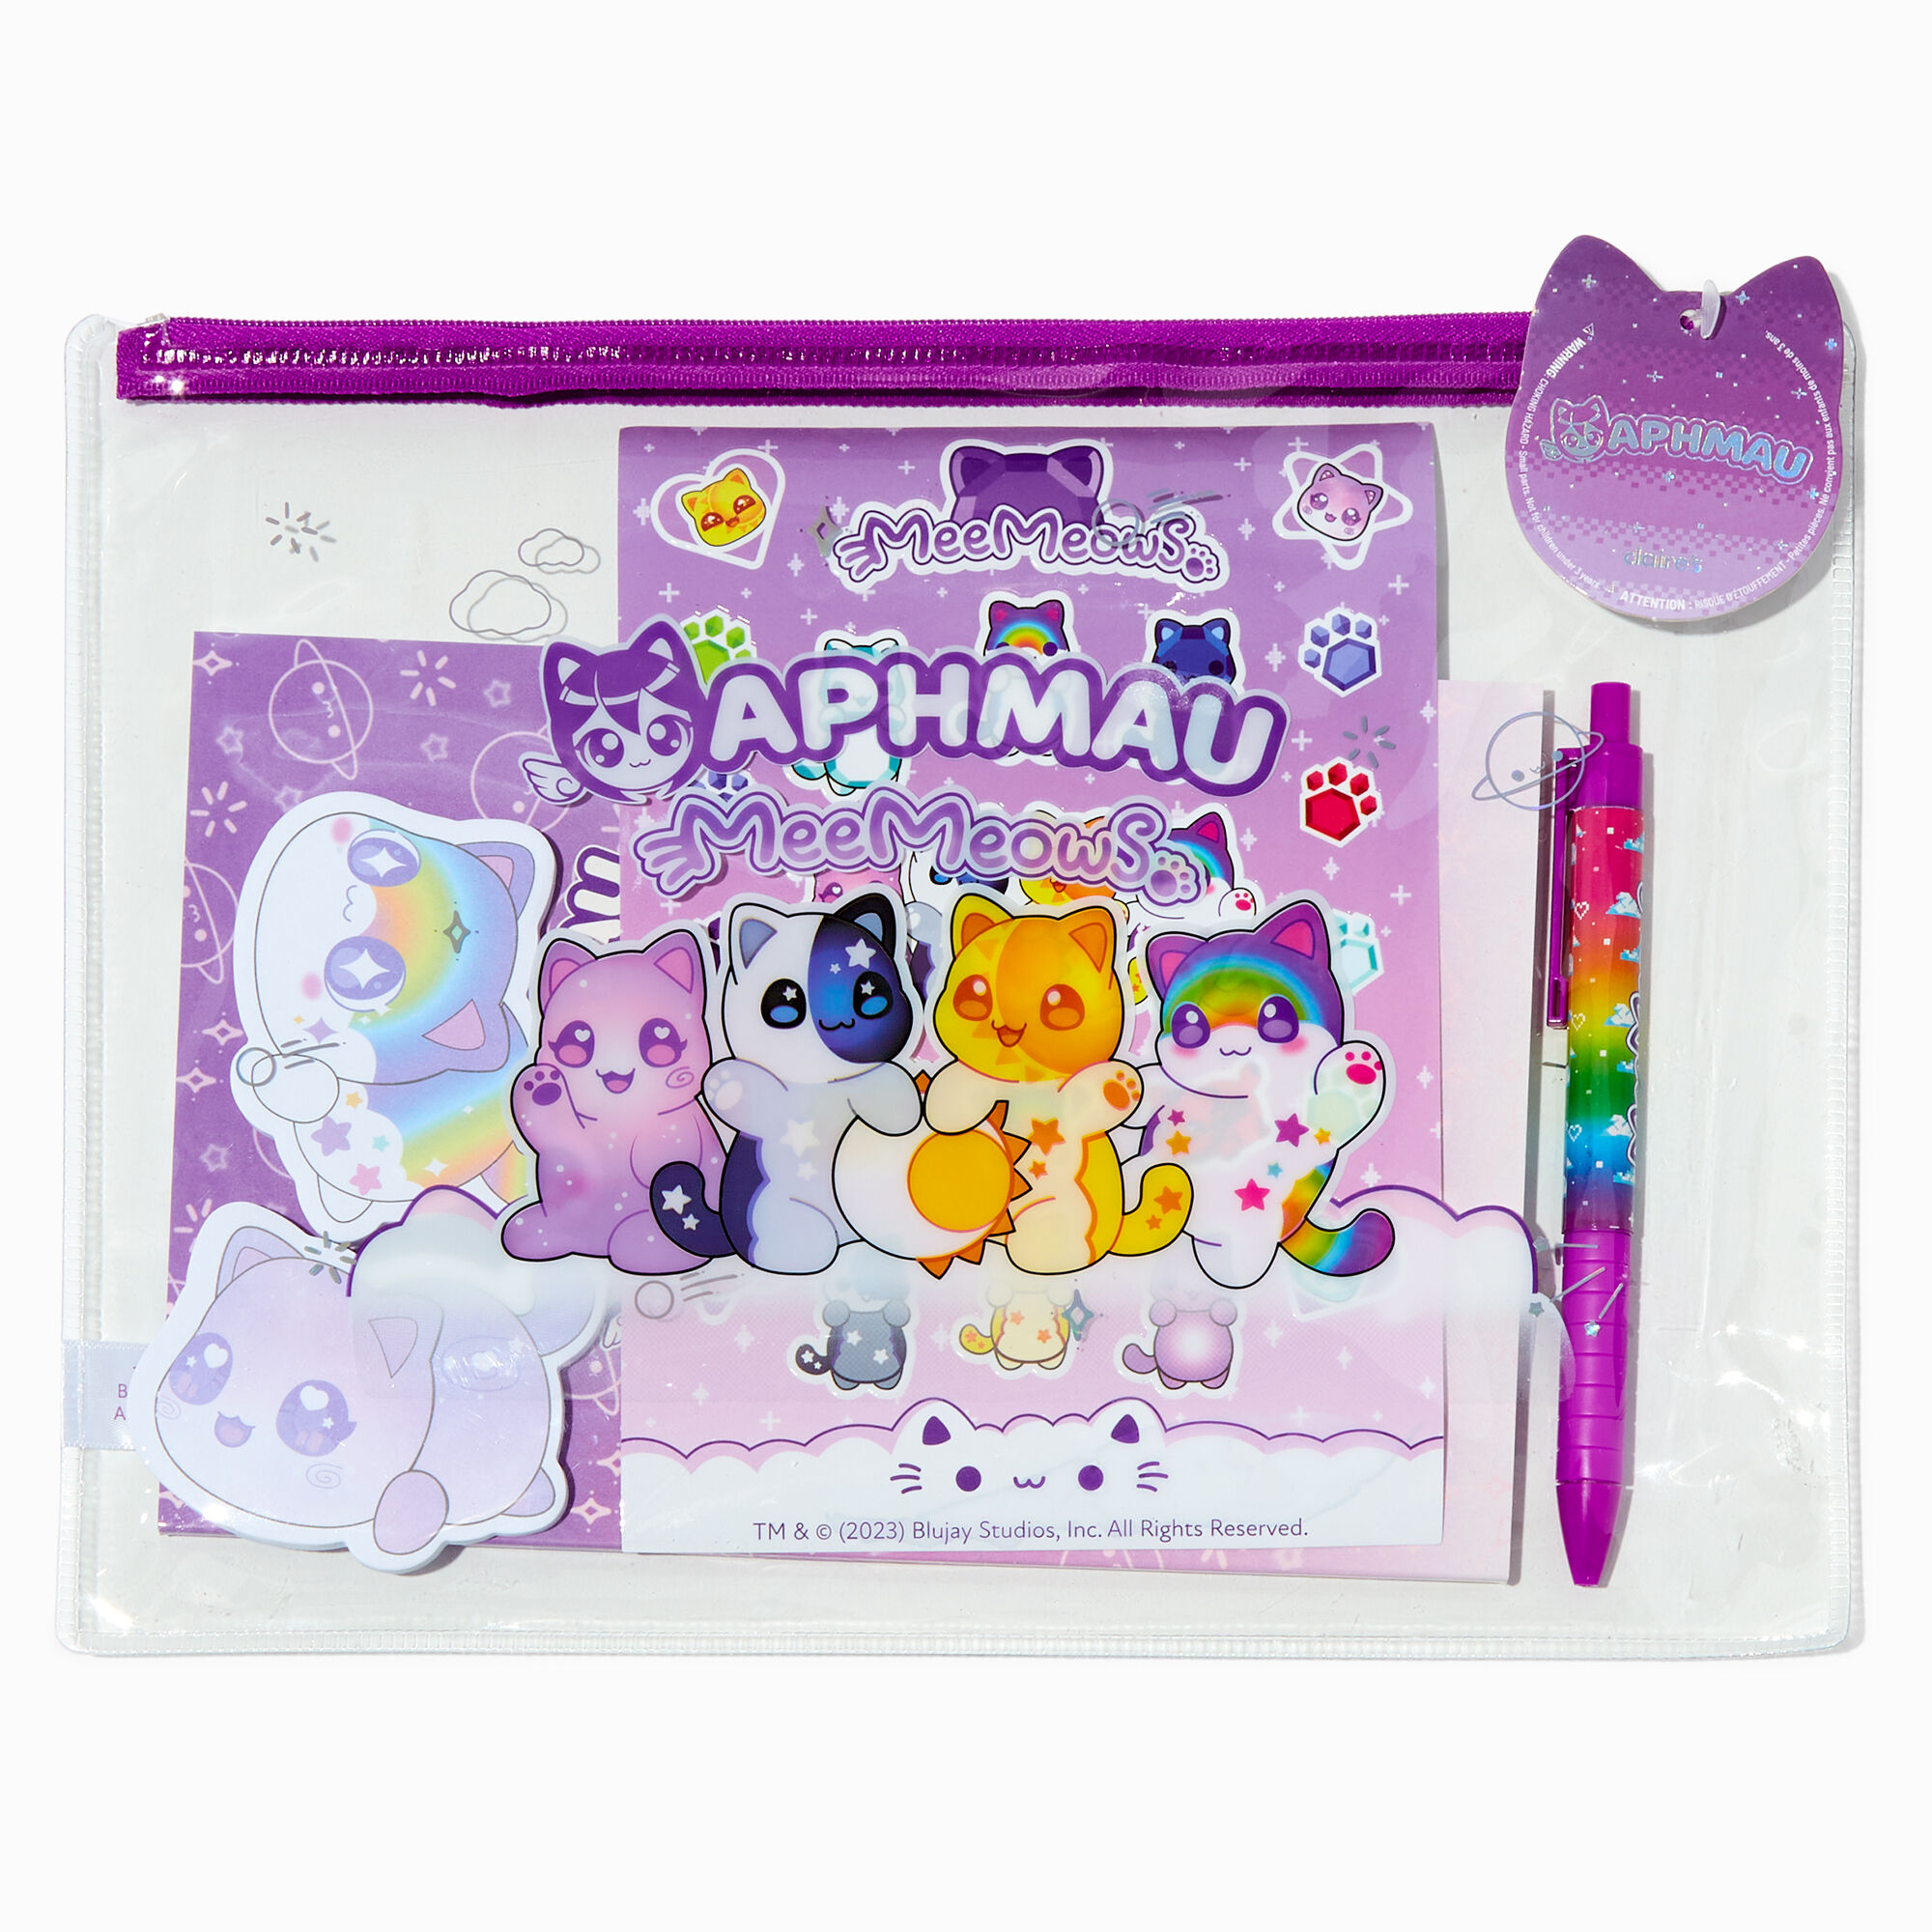 View Aphmau Claires Exclusive Stationery Set information